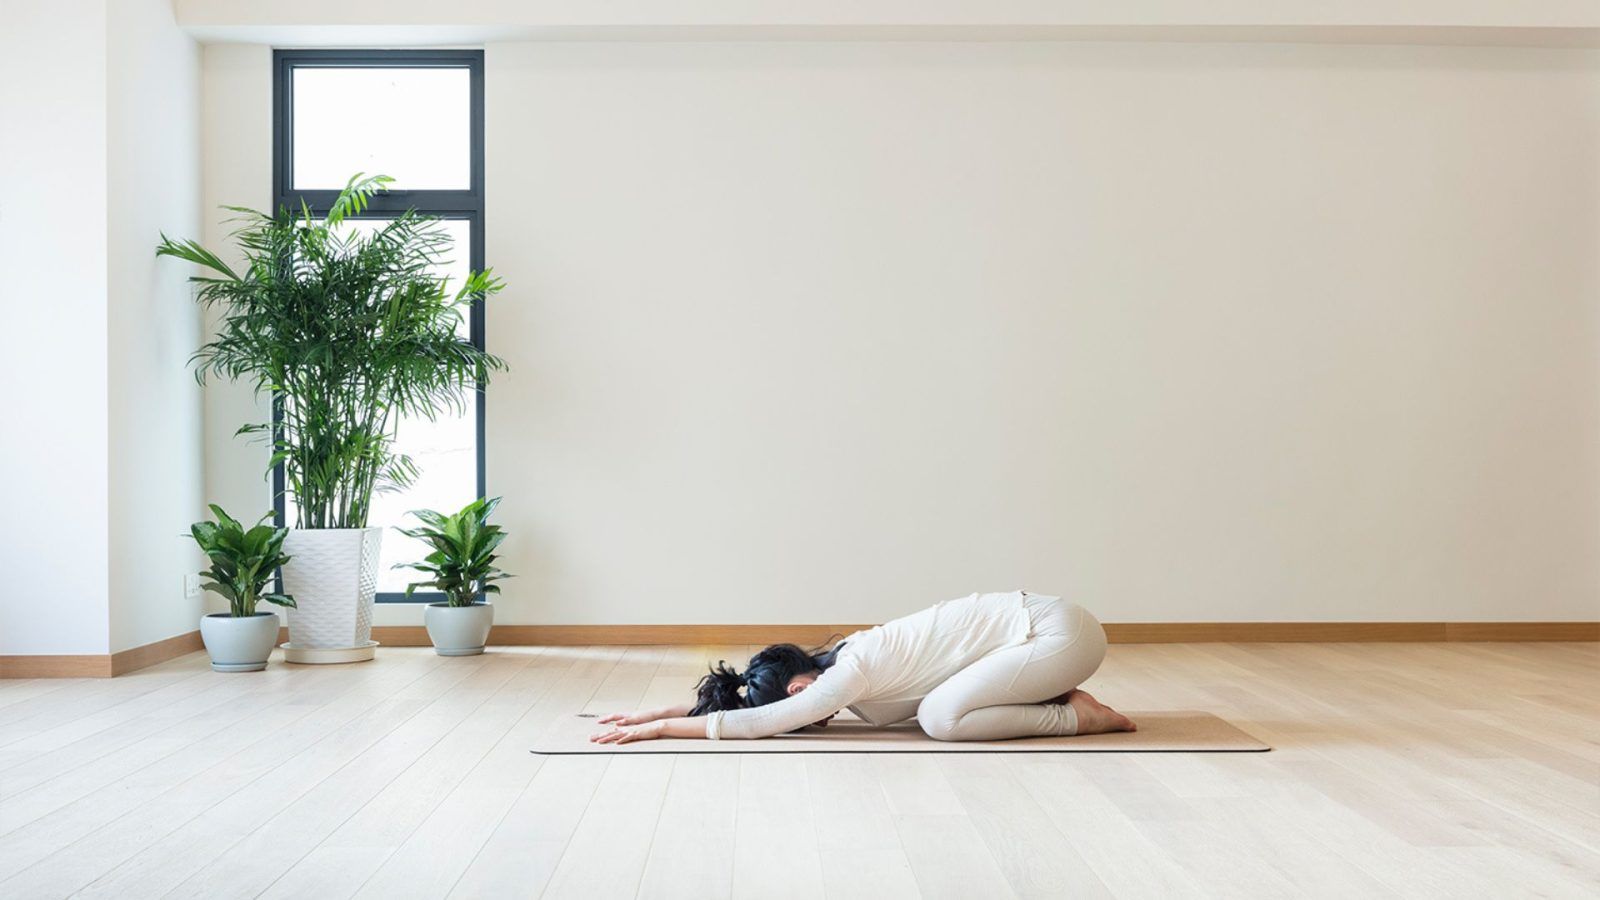 How To Find the Best Location for Your Yoga Studio